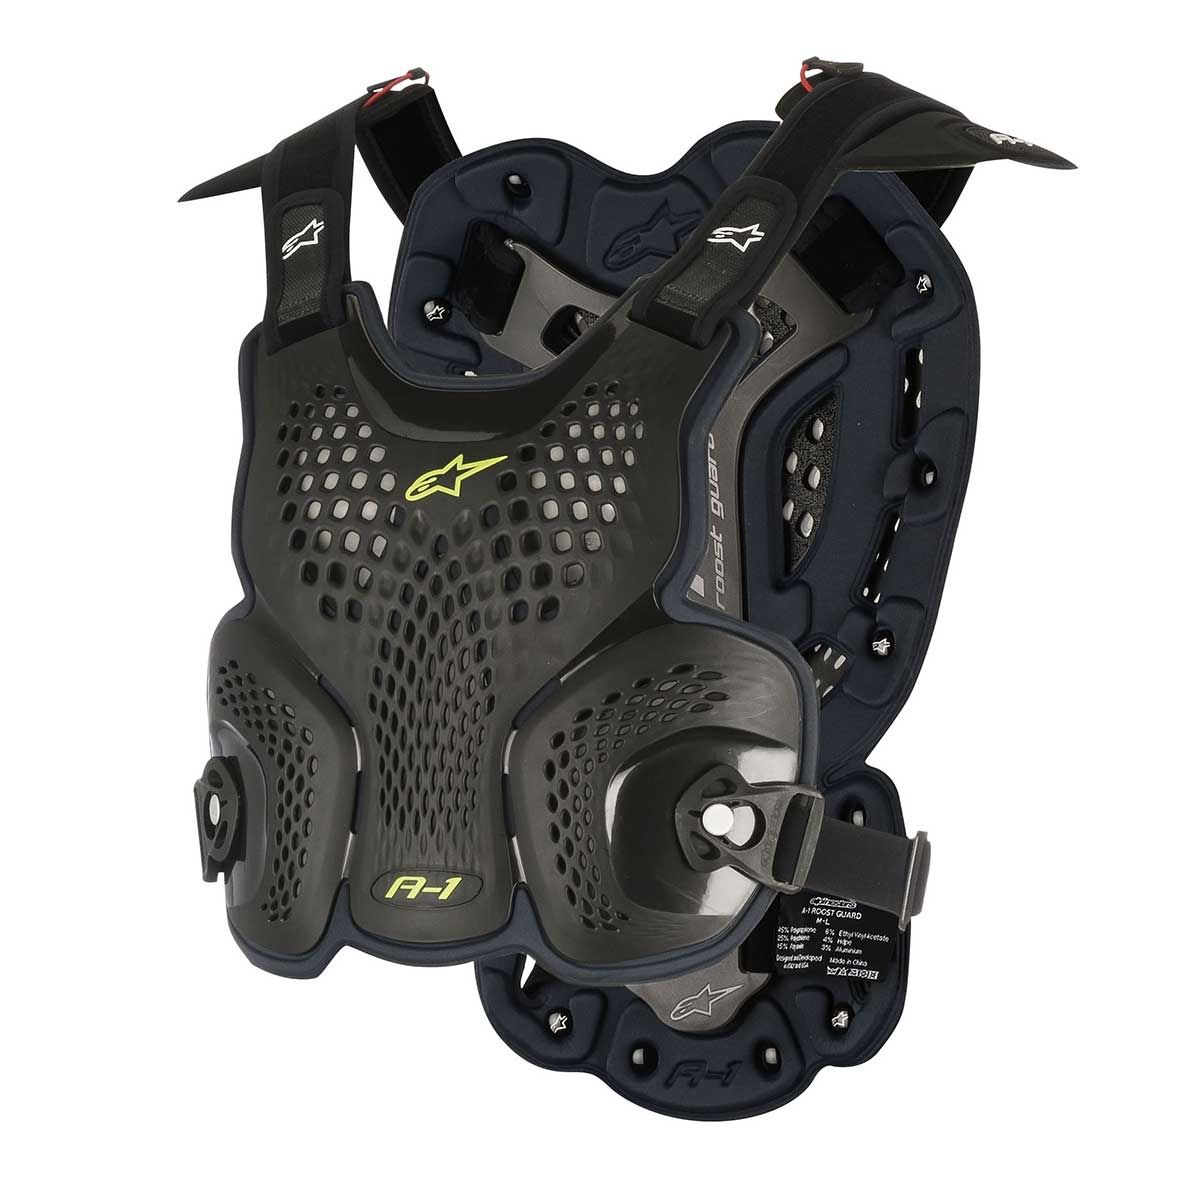 Alpinestars A-1 Roost Guard Black/Anthracite